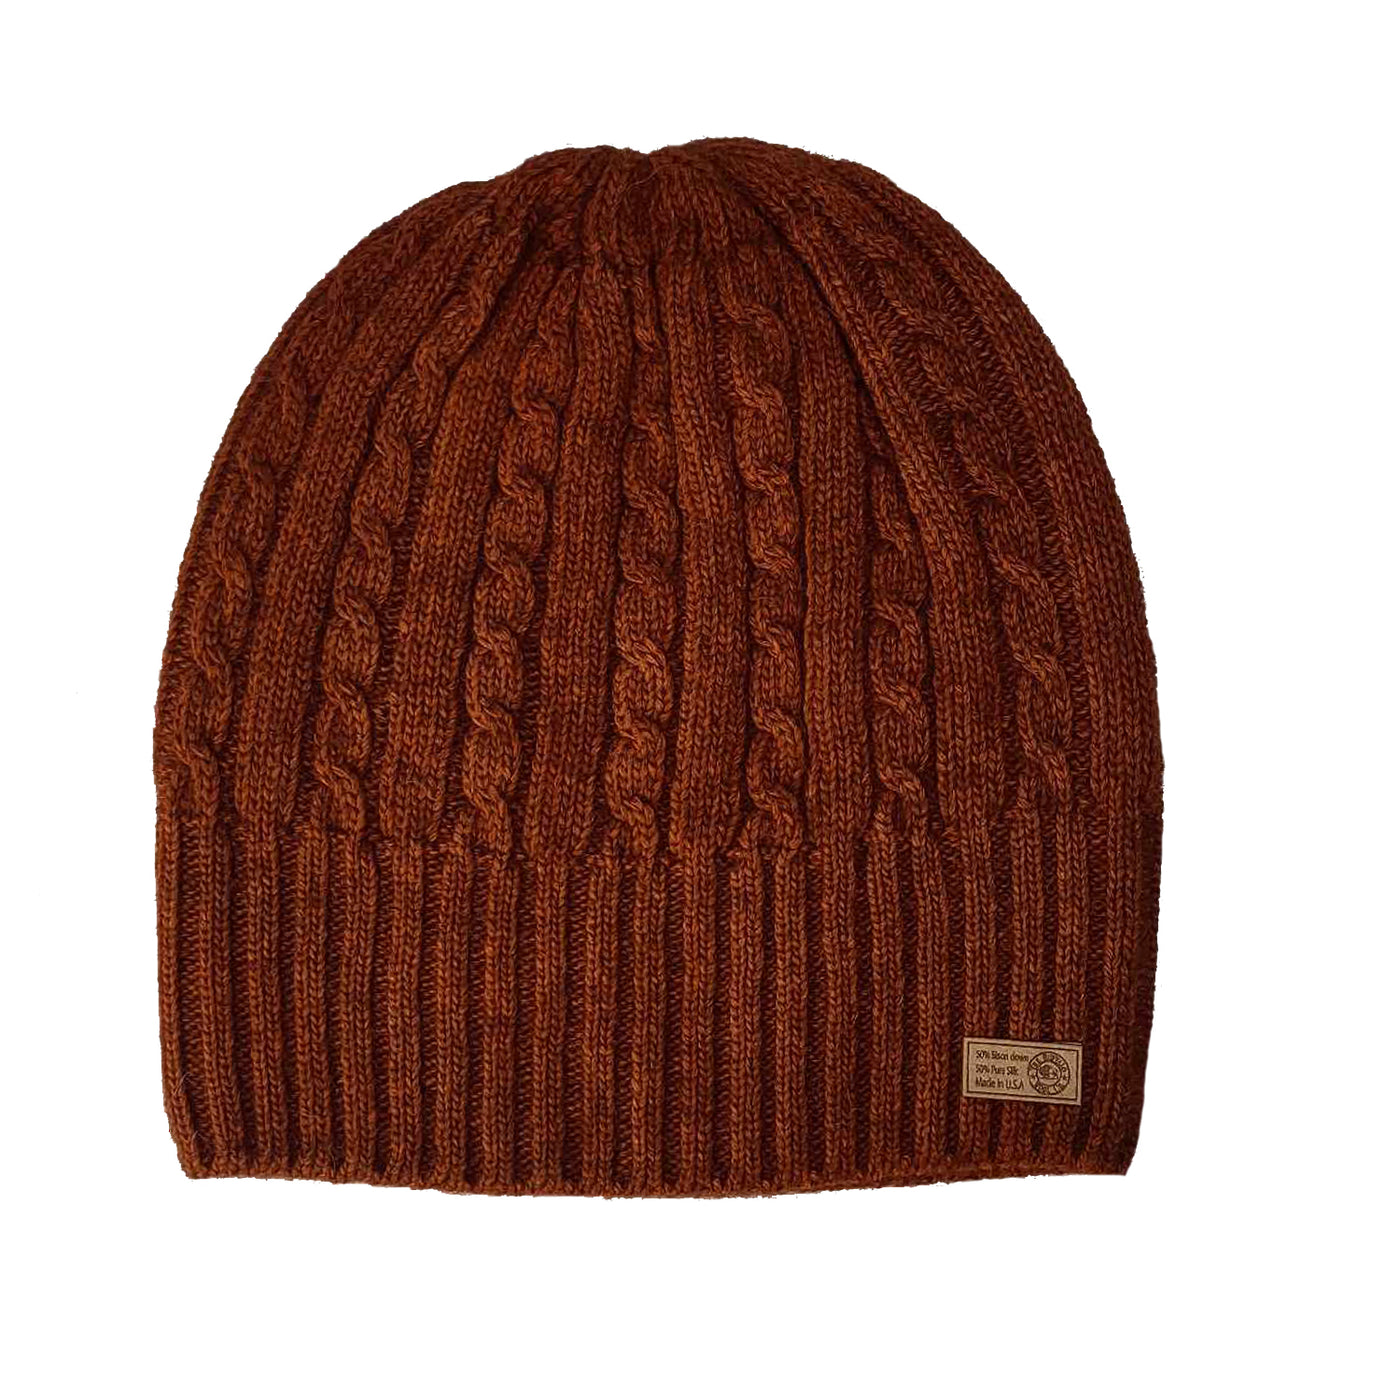 Cabled Beanie Bison